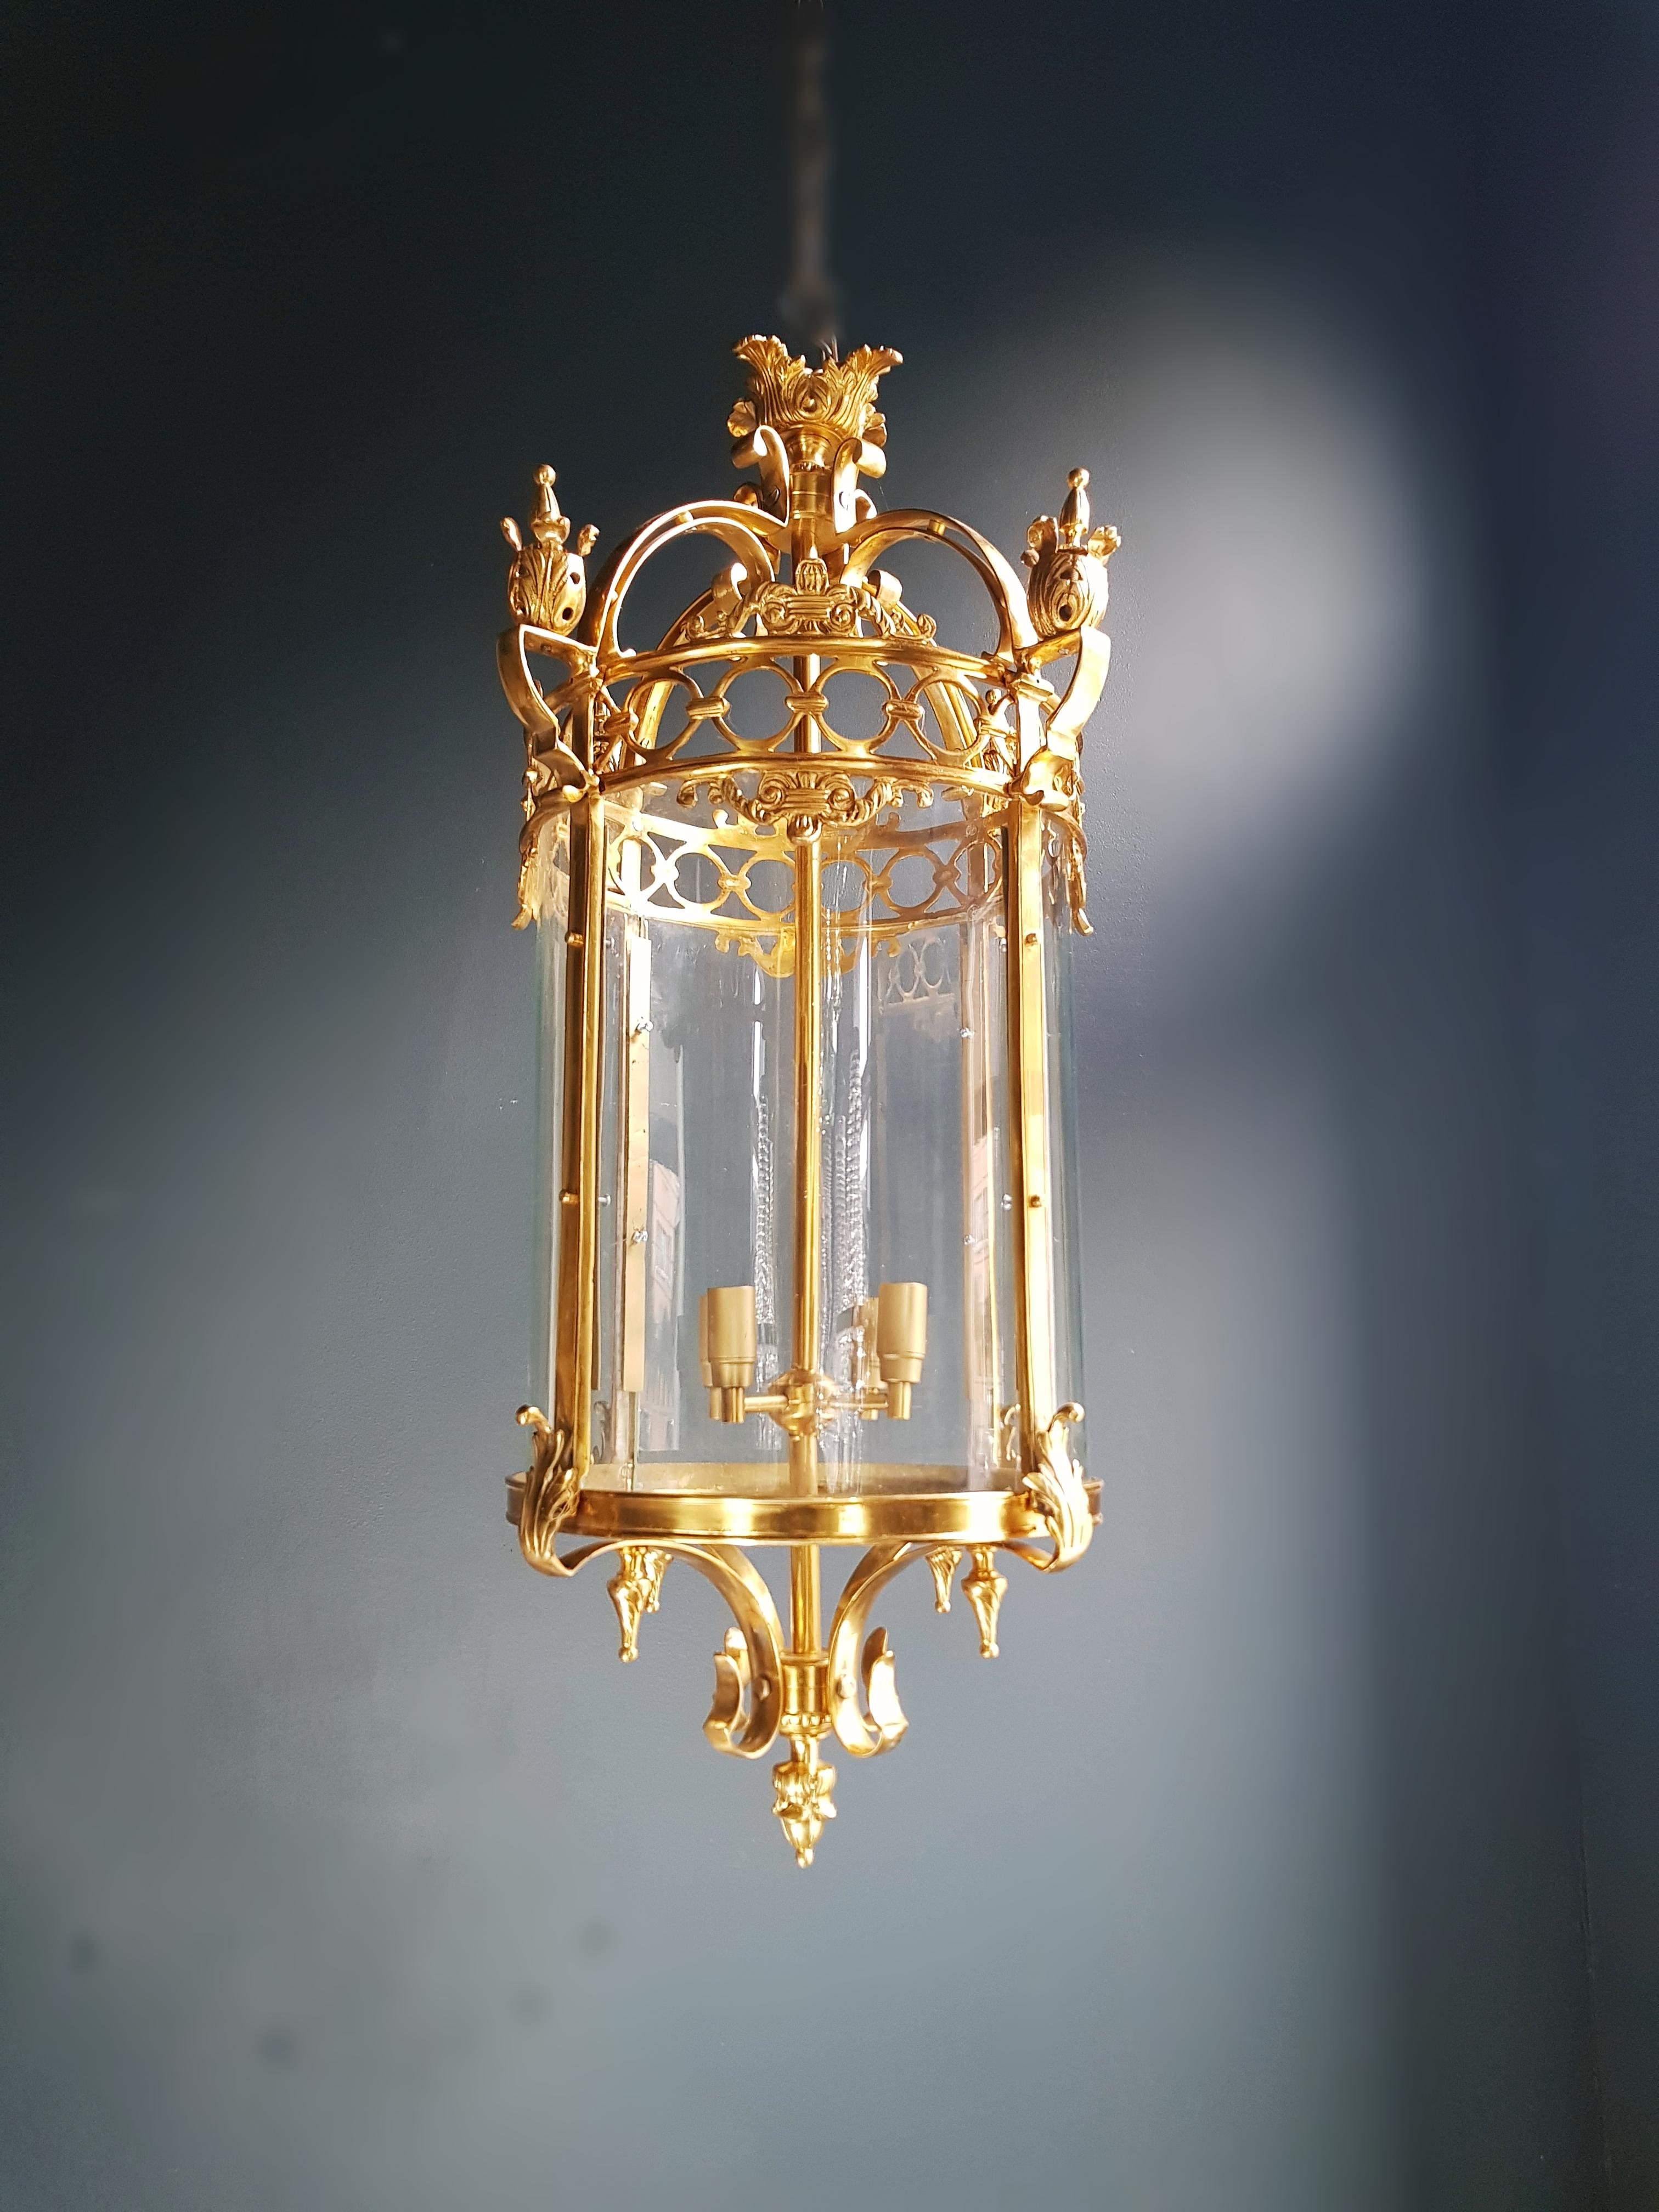 Elegant Louis XVI Style Brass Lantern: Illuminate with Distinction

Explore our exquisite collection of large cylindrical lanterns crafted in the timeless Louis XVI style, a harmonious fusion of brass and glass that exudes enduring sophistication.